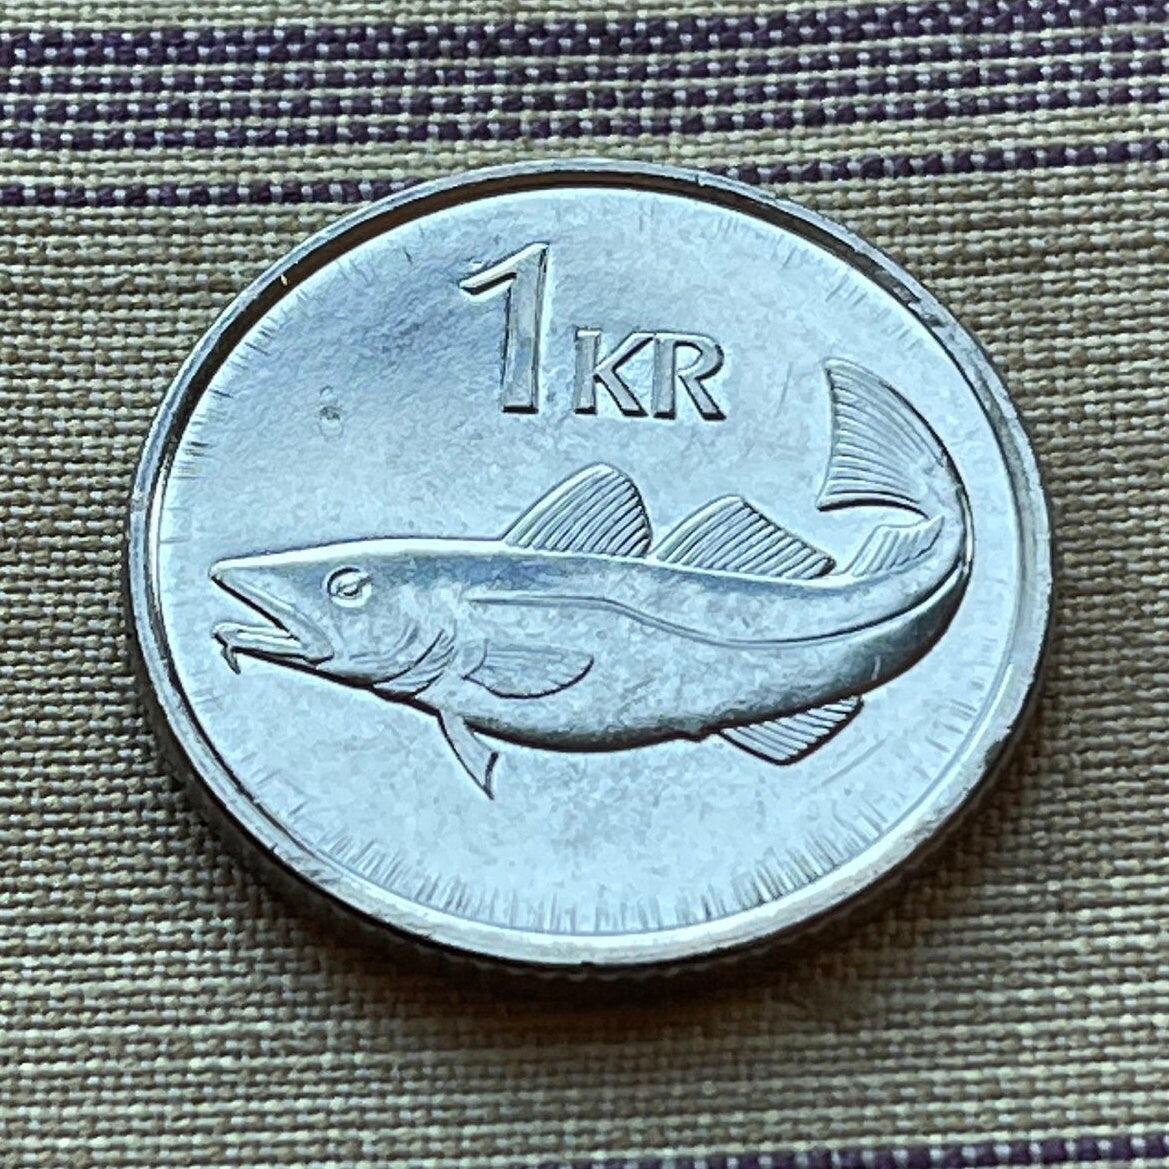 Cod Fish & Giant Bergrisi 1 Krona Iceland Authentic Coin Money for Jewelry and Craft Making